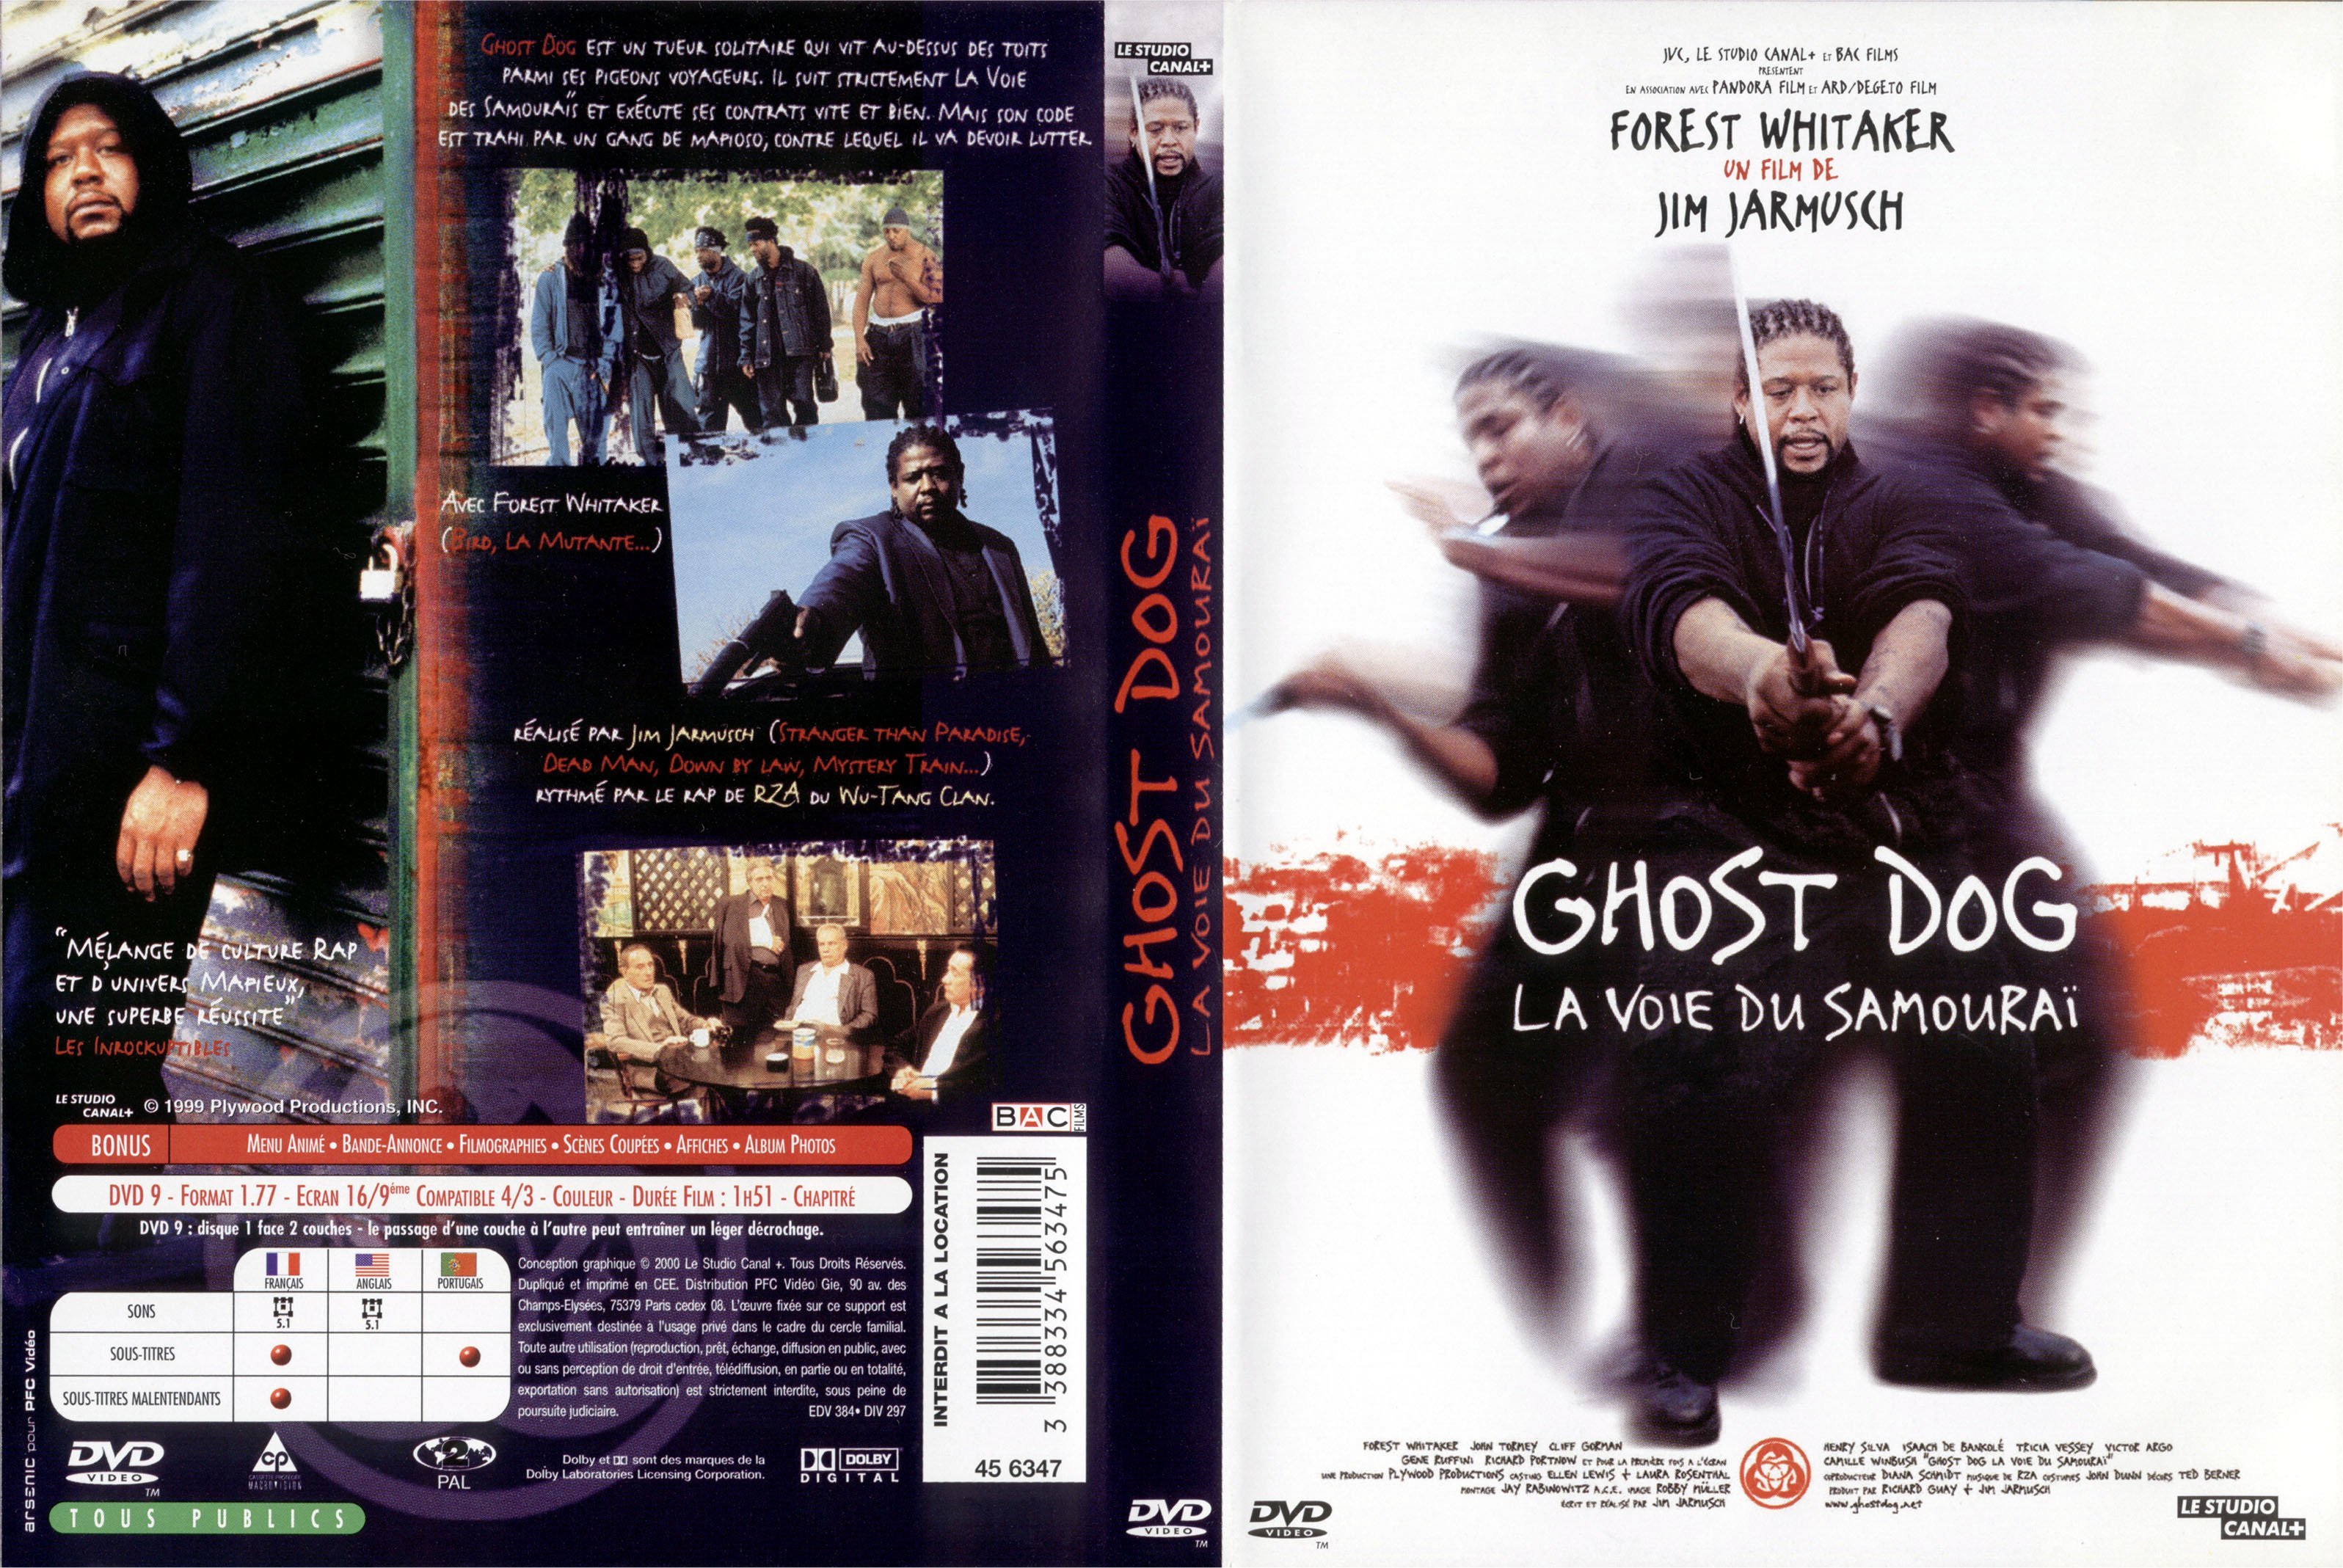 Jaquette DVD Ghost dog